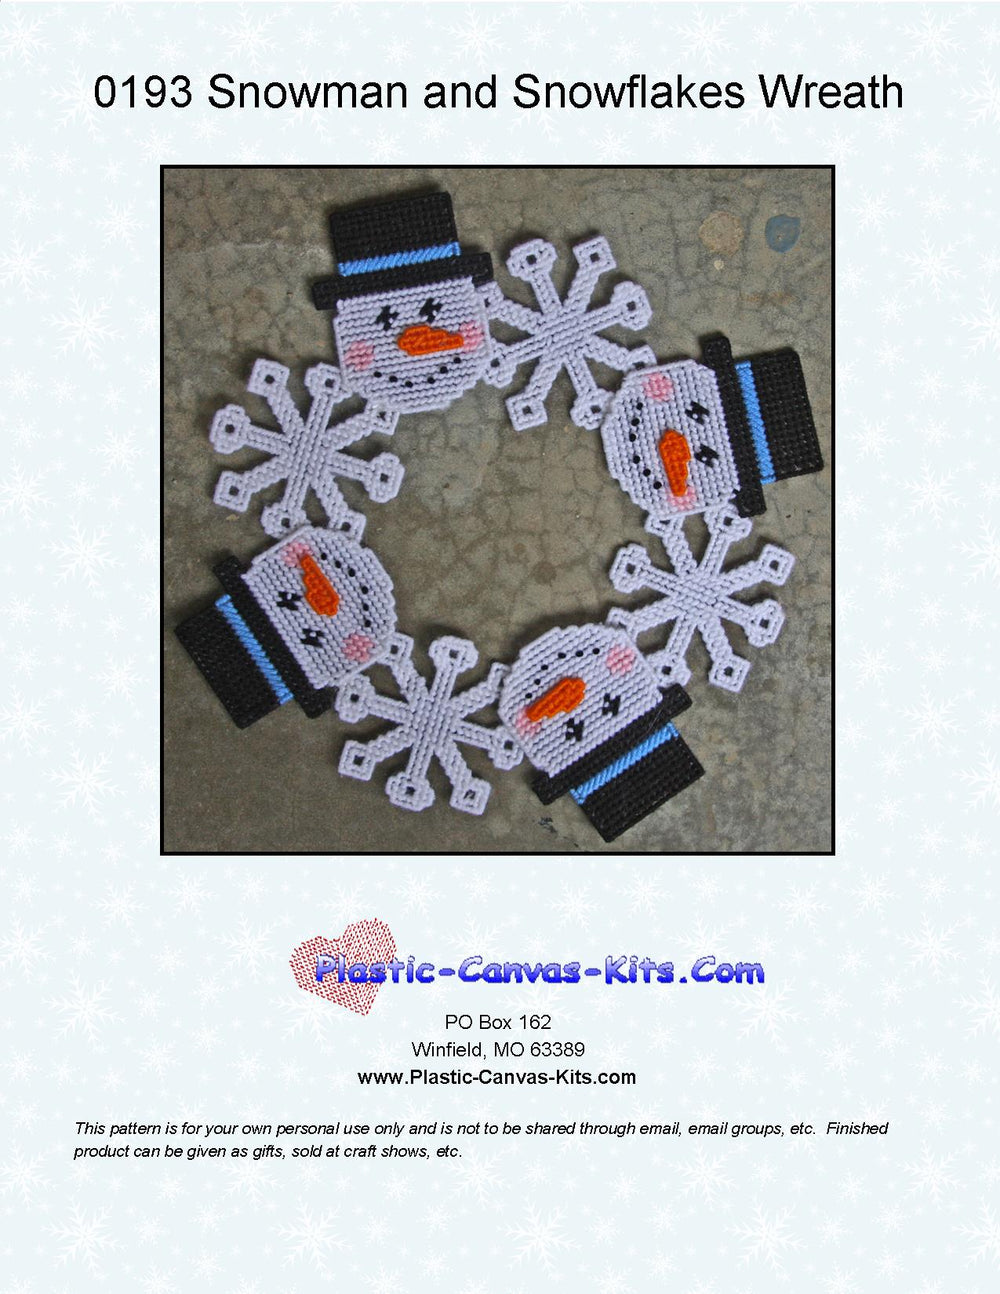 Snowman and Snowflakes Wreath